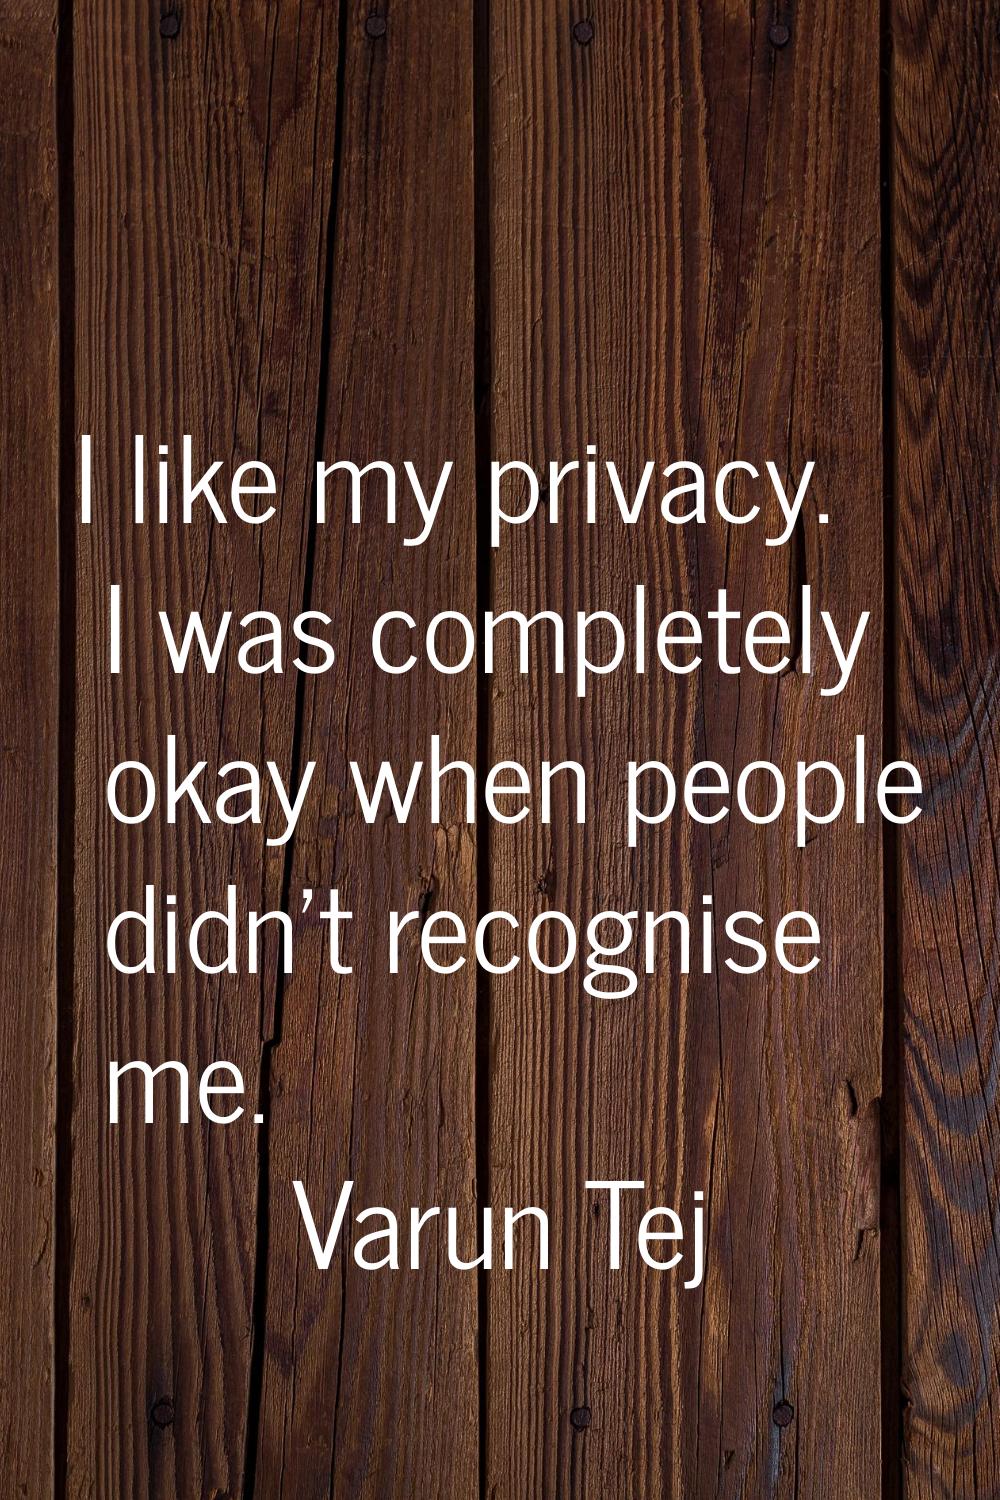 I like my privacy. I was completely okay when people didn't recognise me.